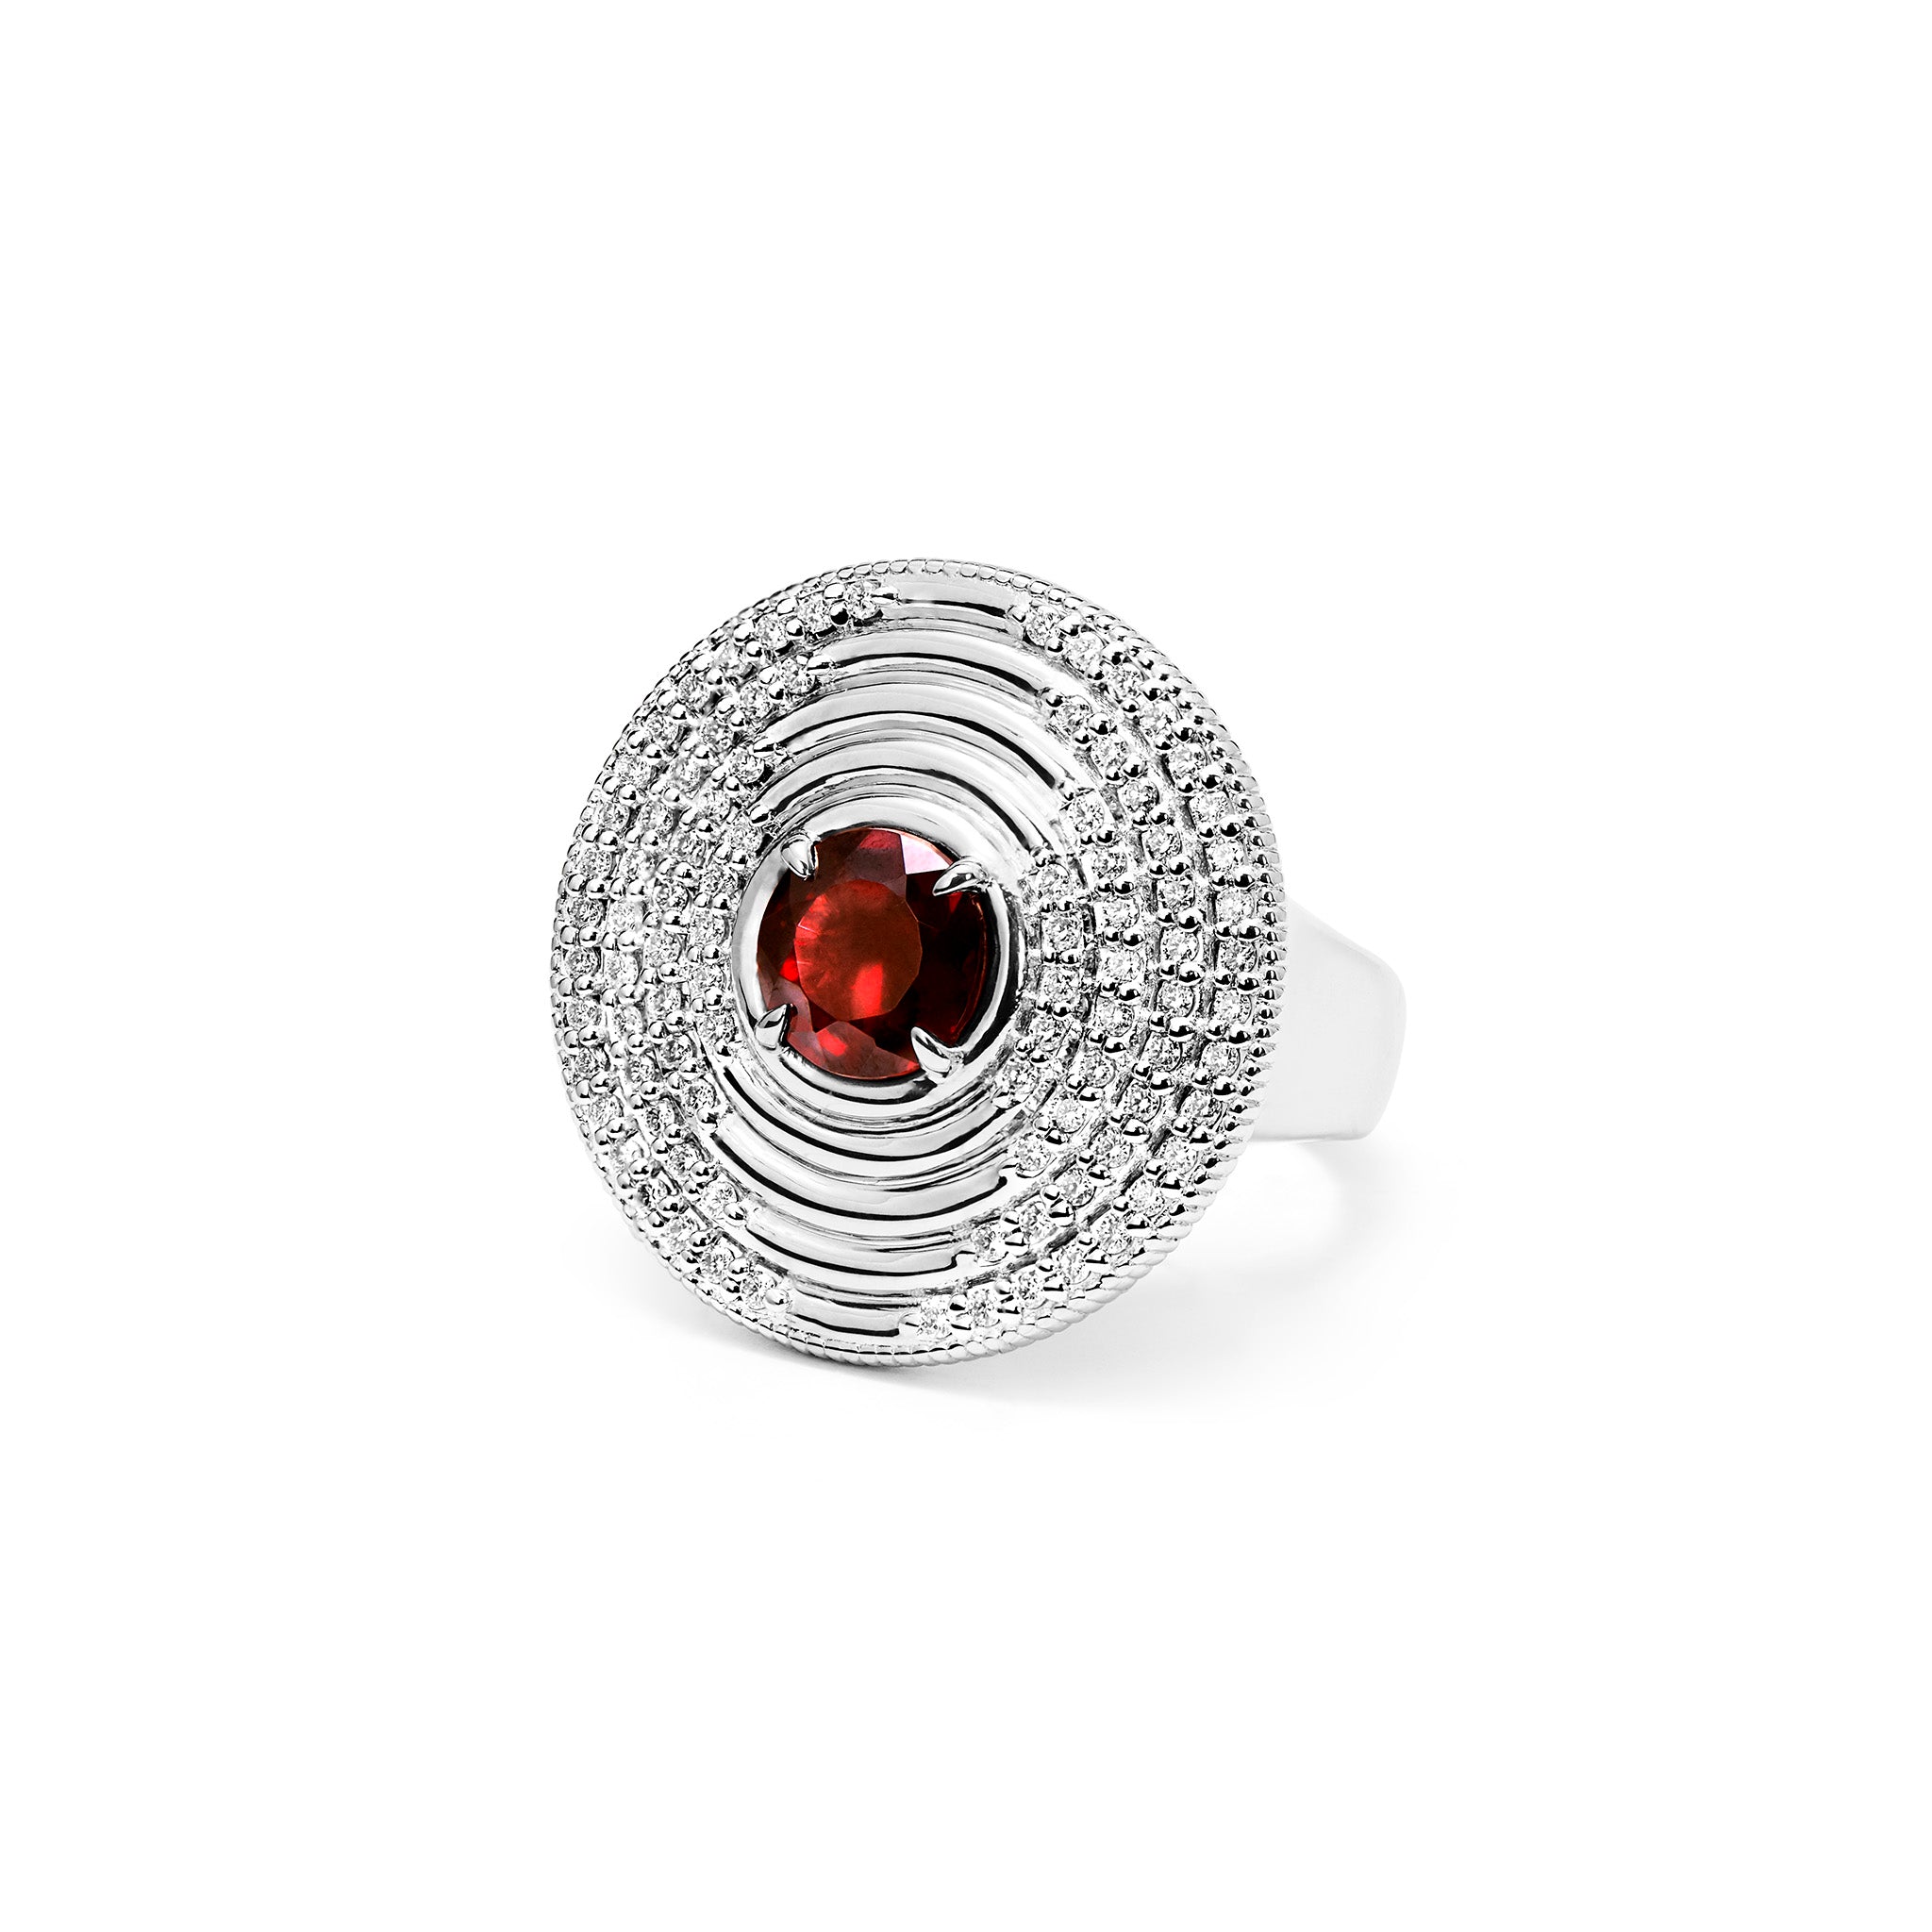 Max Round Ring with Garnet and Diamonds